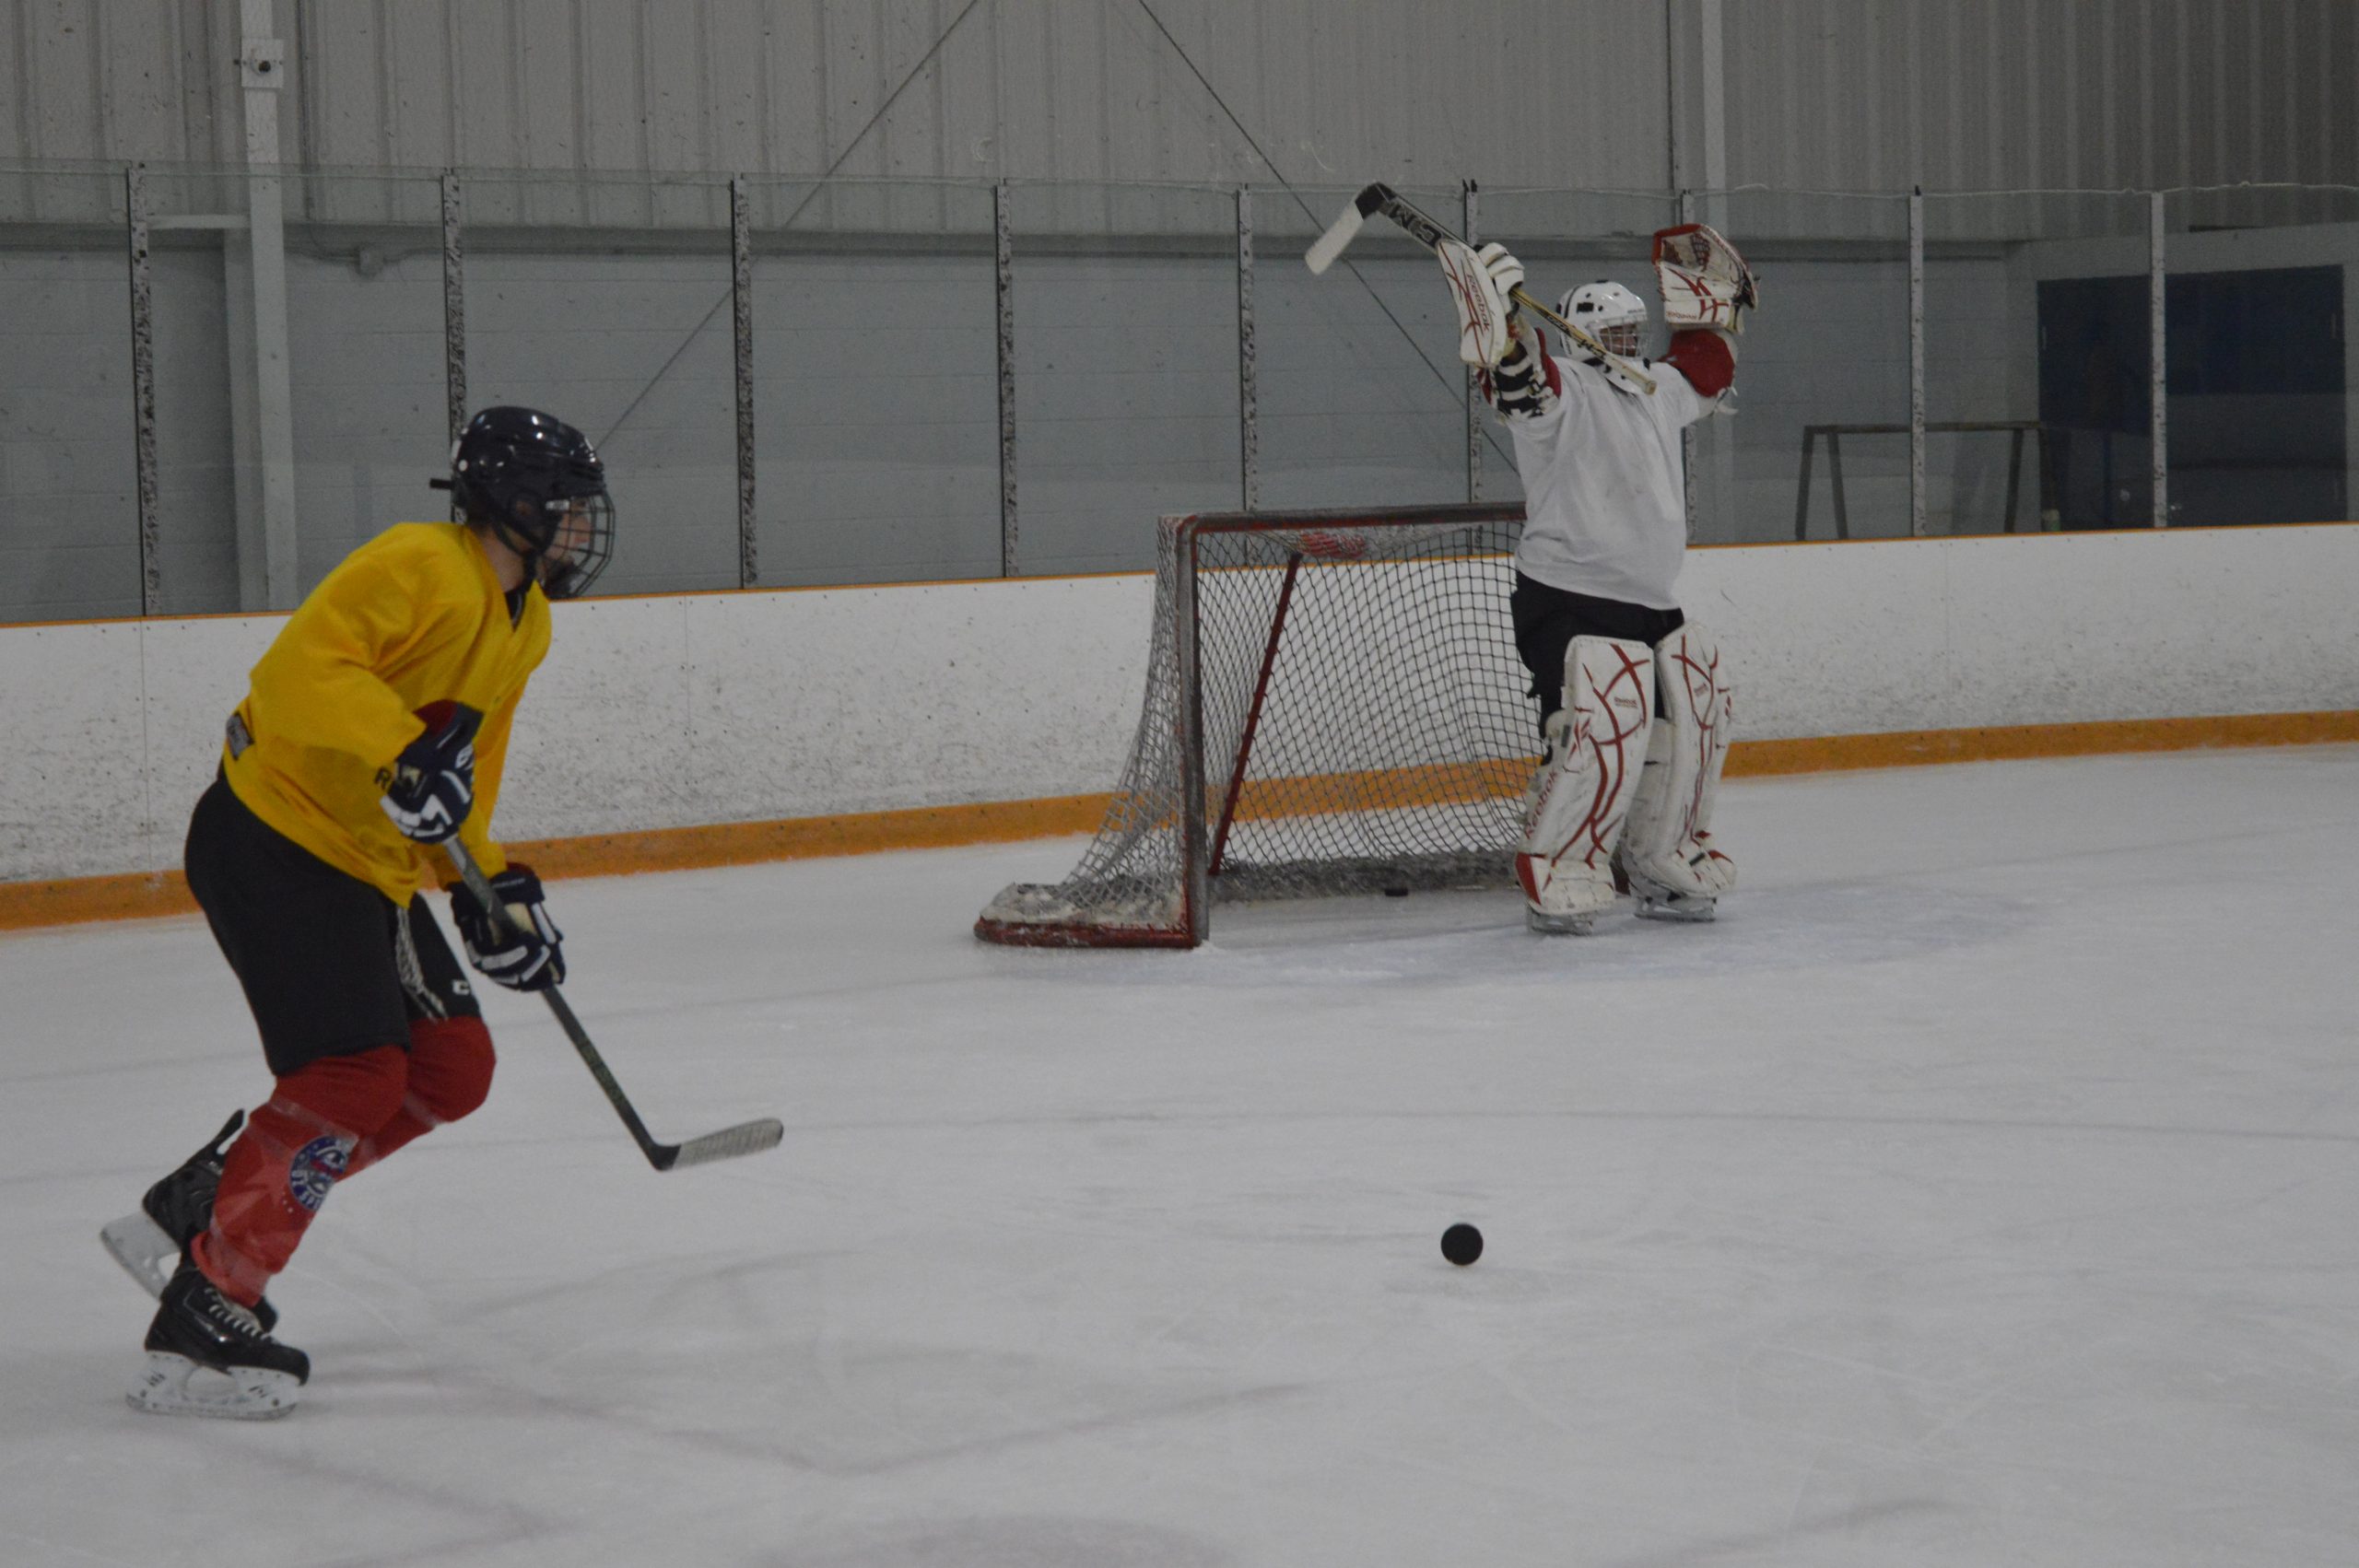 hockey rink with one player and one goalie